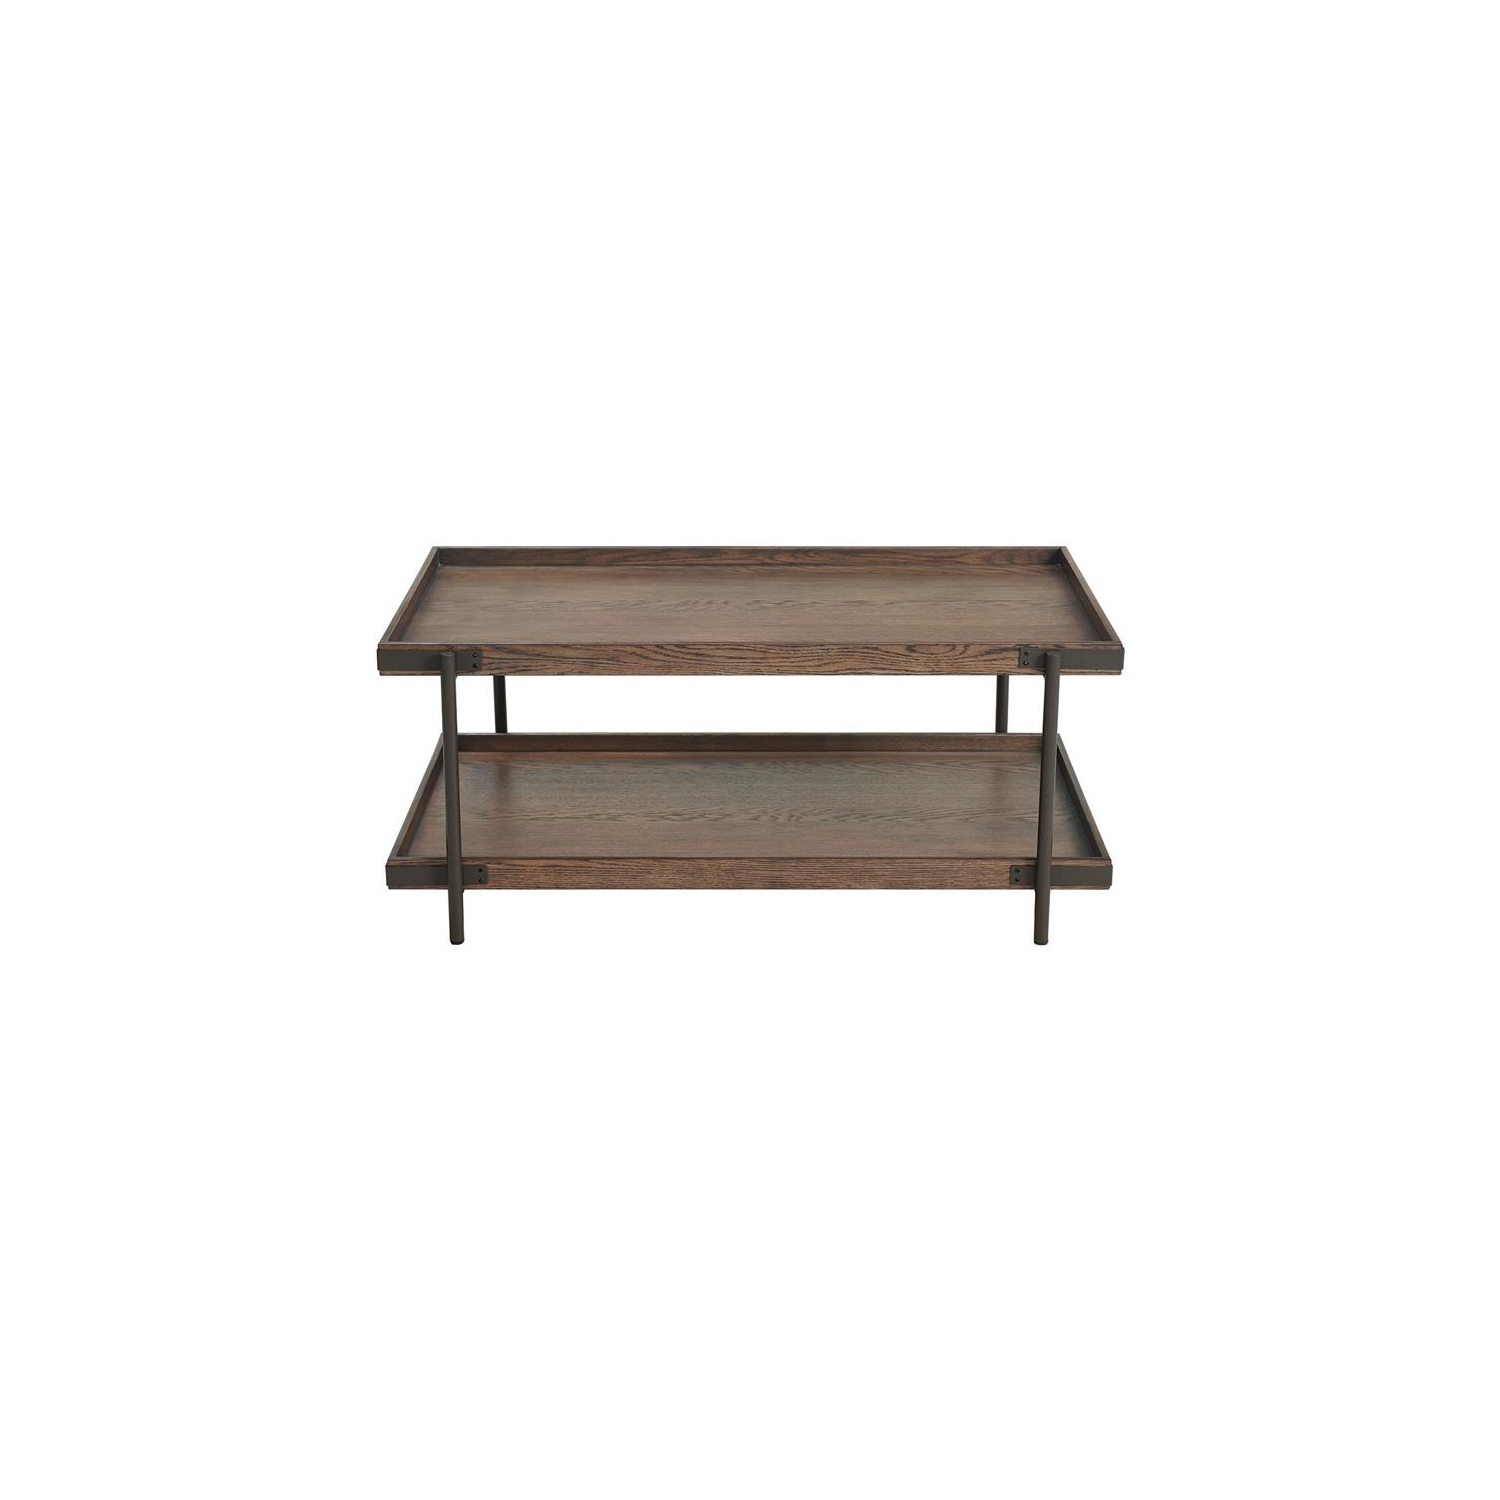 Alaterre Furniture Kyra 42"L Oak and Wood / Metal Coffee Table with Shelf